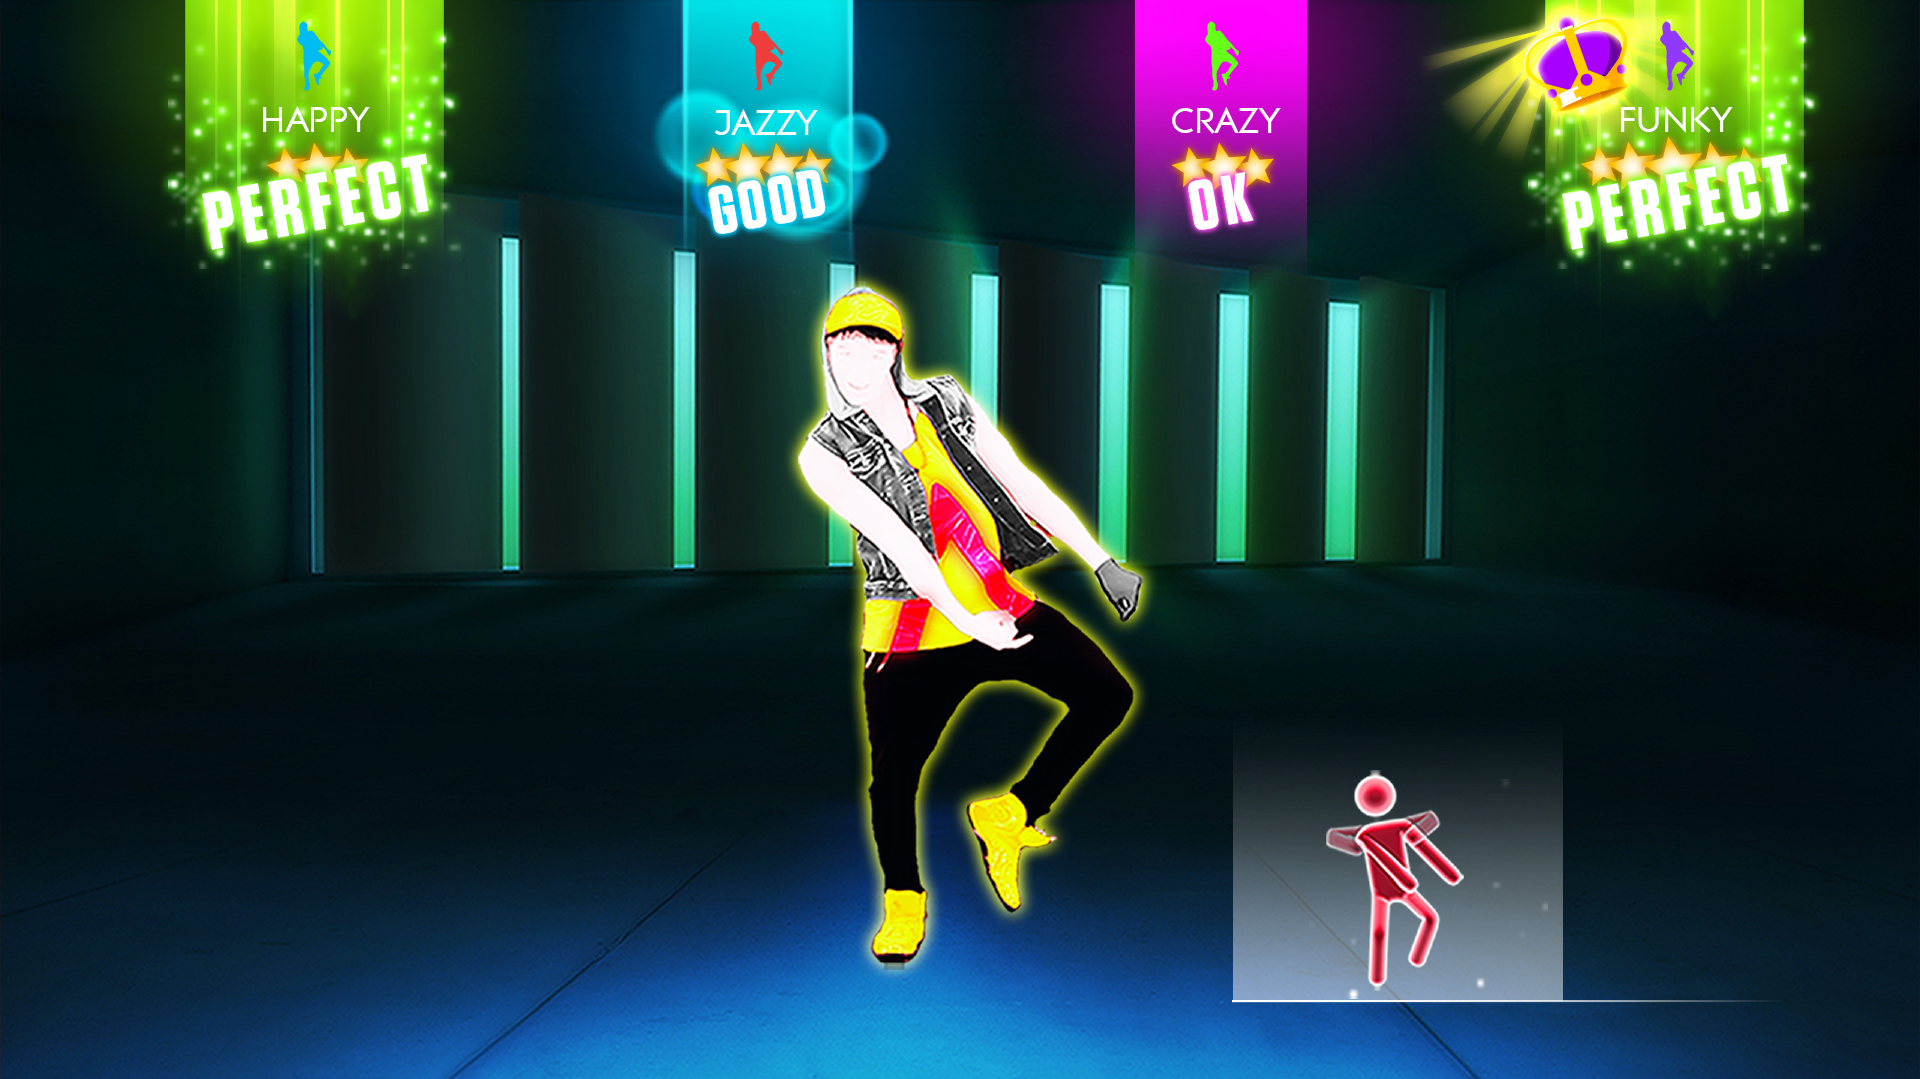 download free just dance 2004